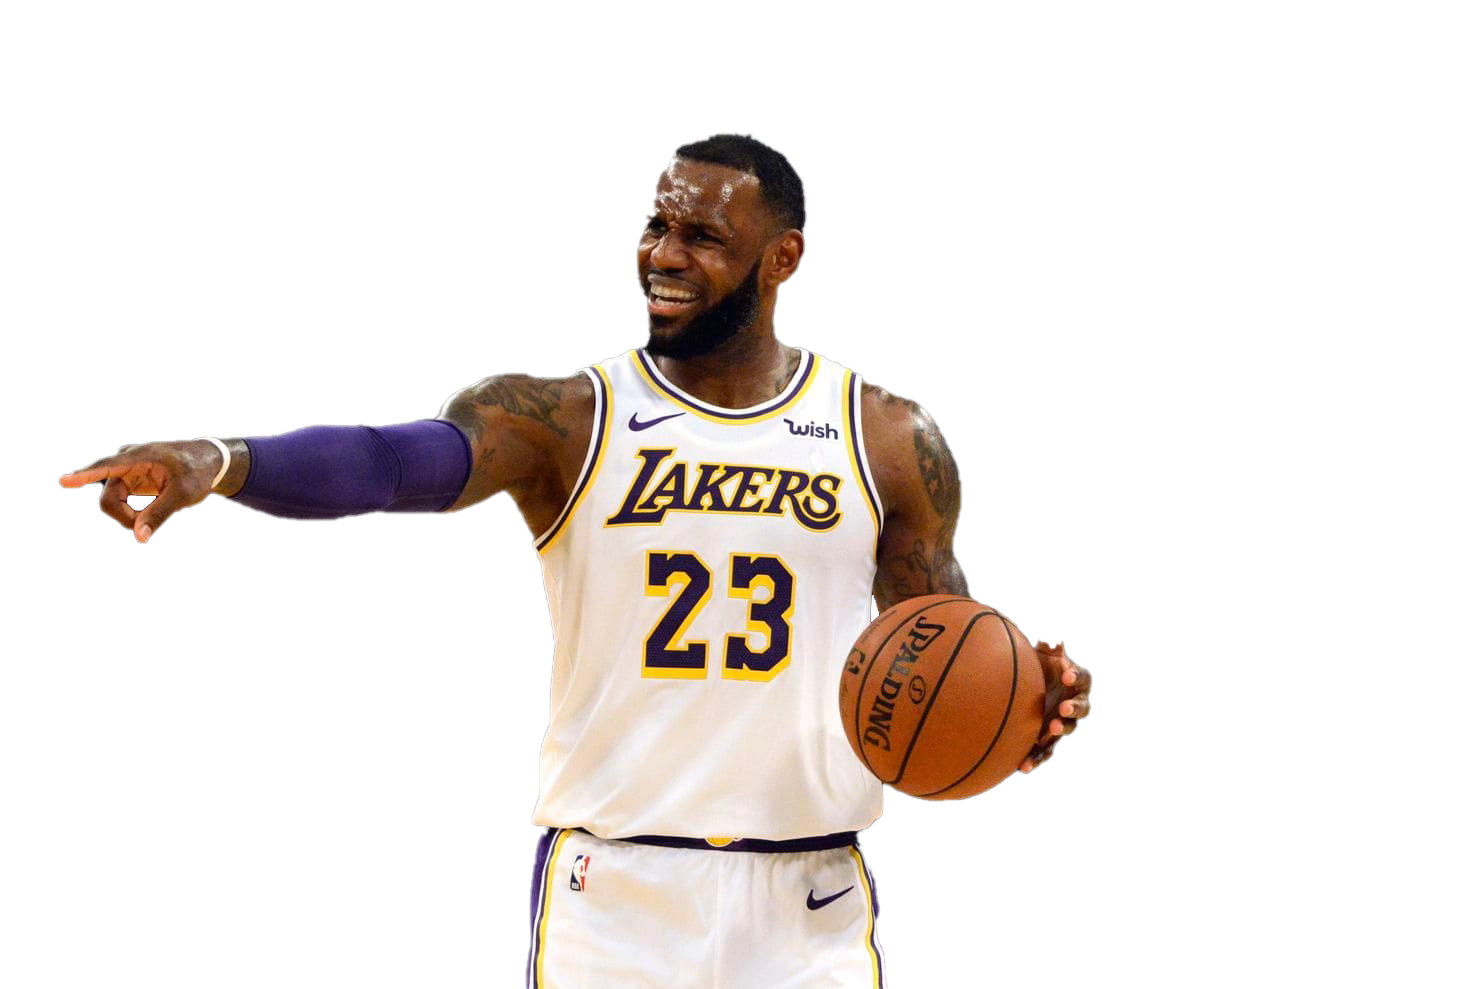 Lebron James Basketball Player PNG Pic - PNG All | PNG All